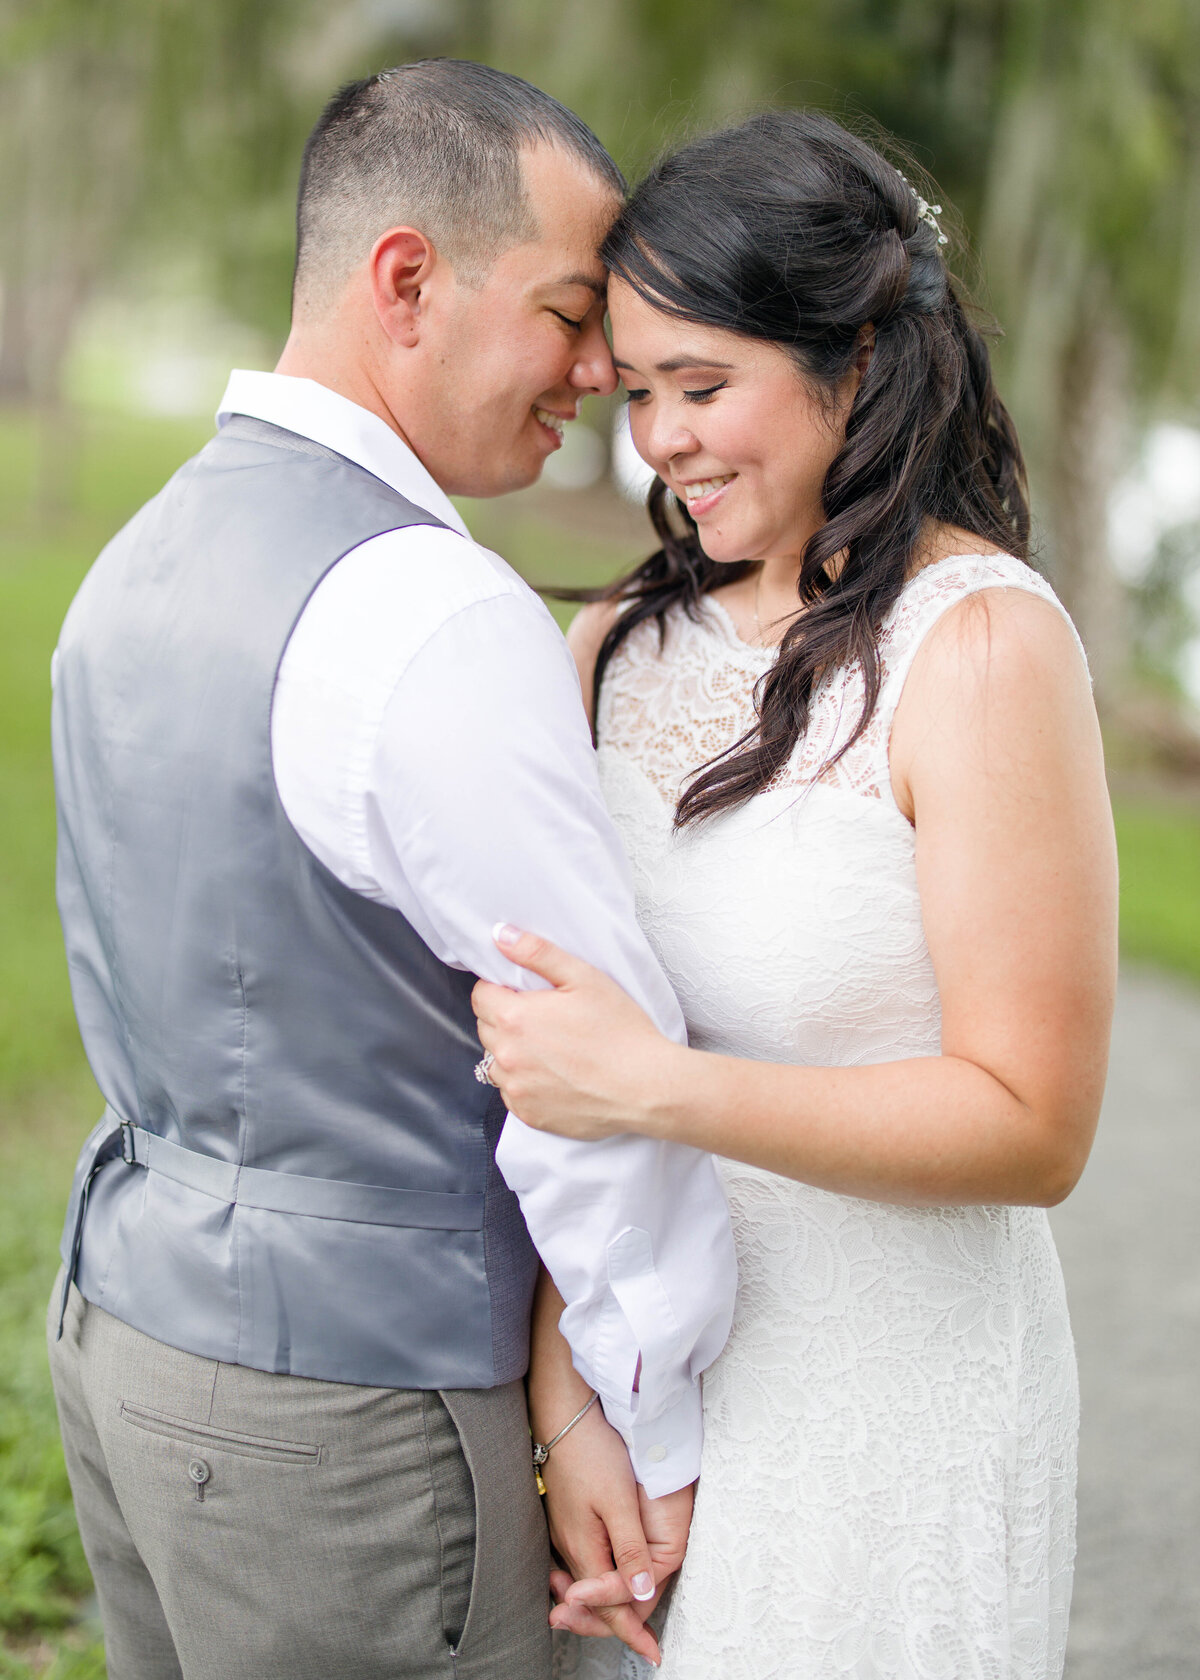 bride and groom intimate moment byby Lucas Mason Photography in Orlando, Windermere, Winder Garden area